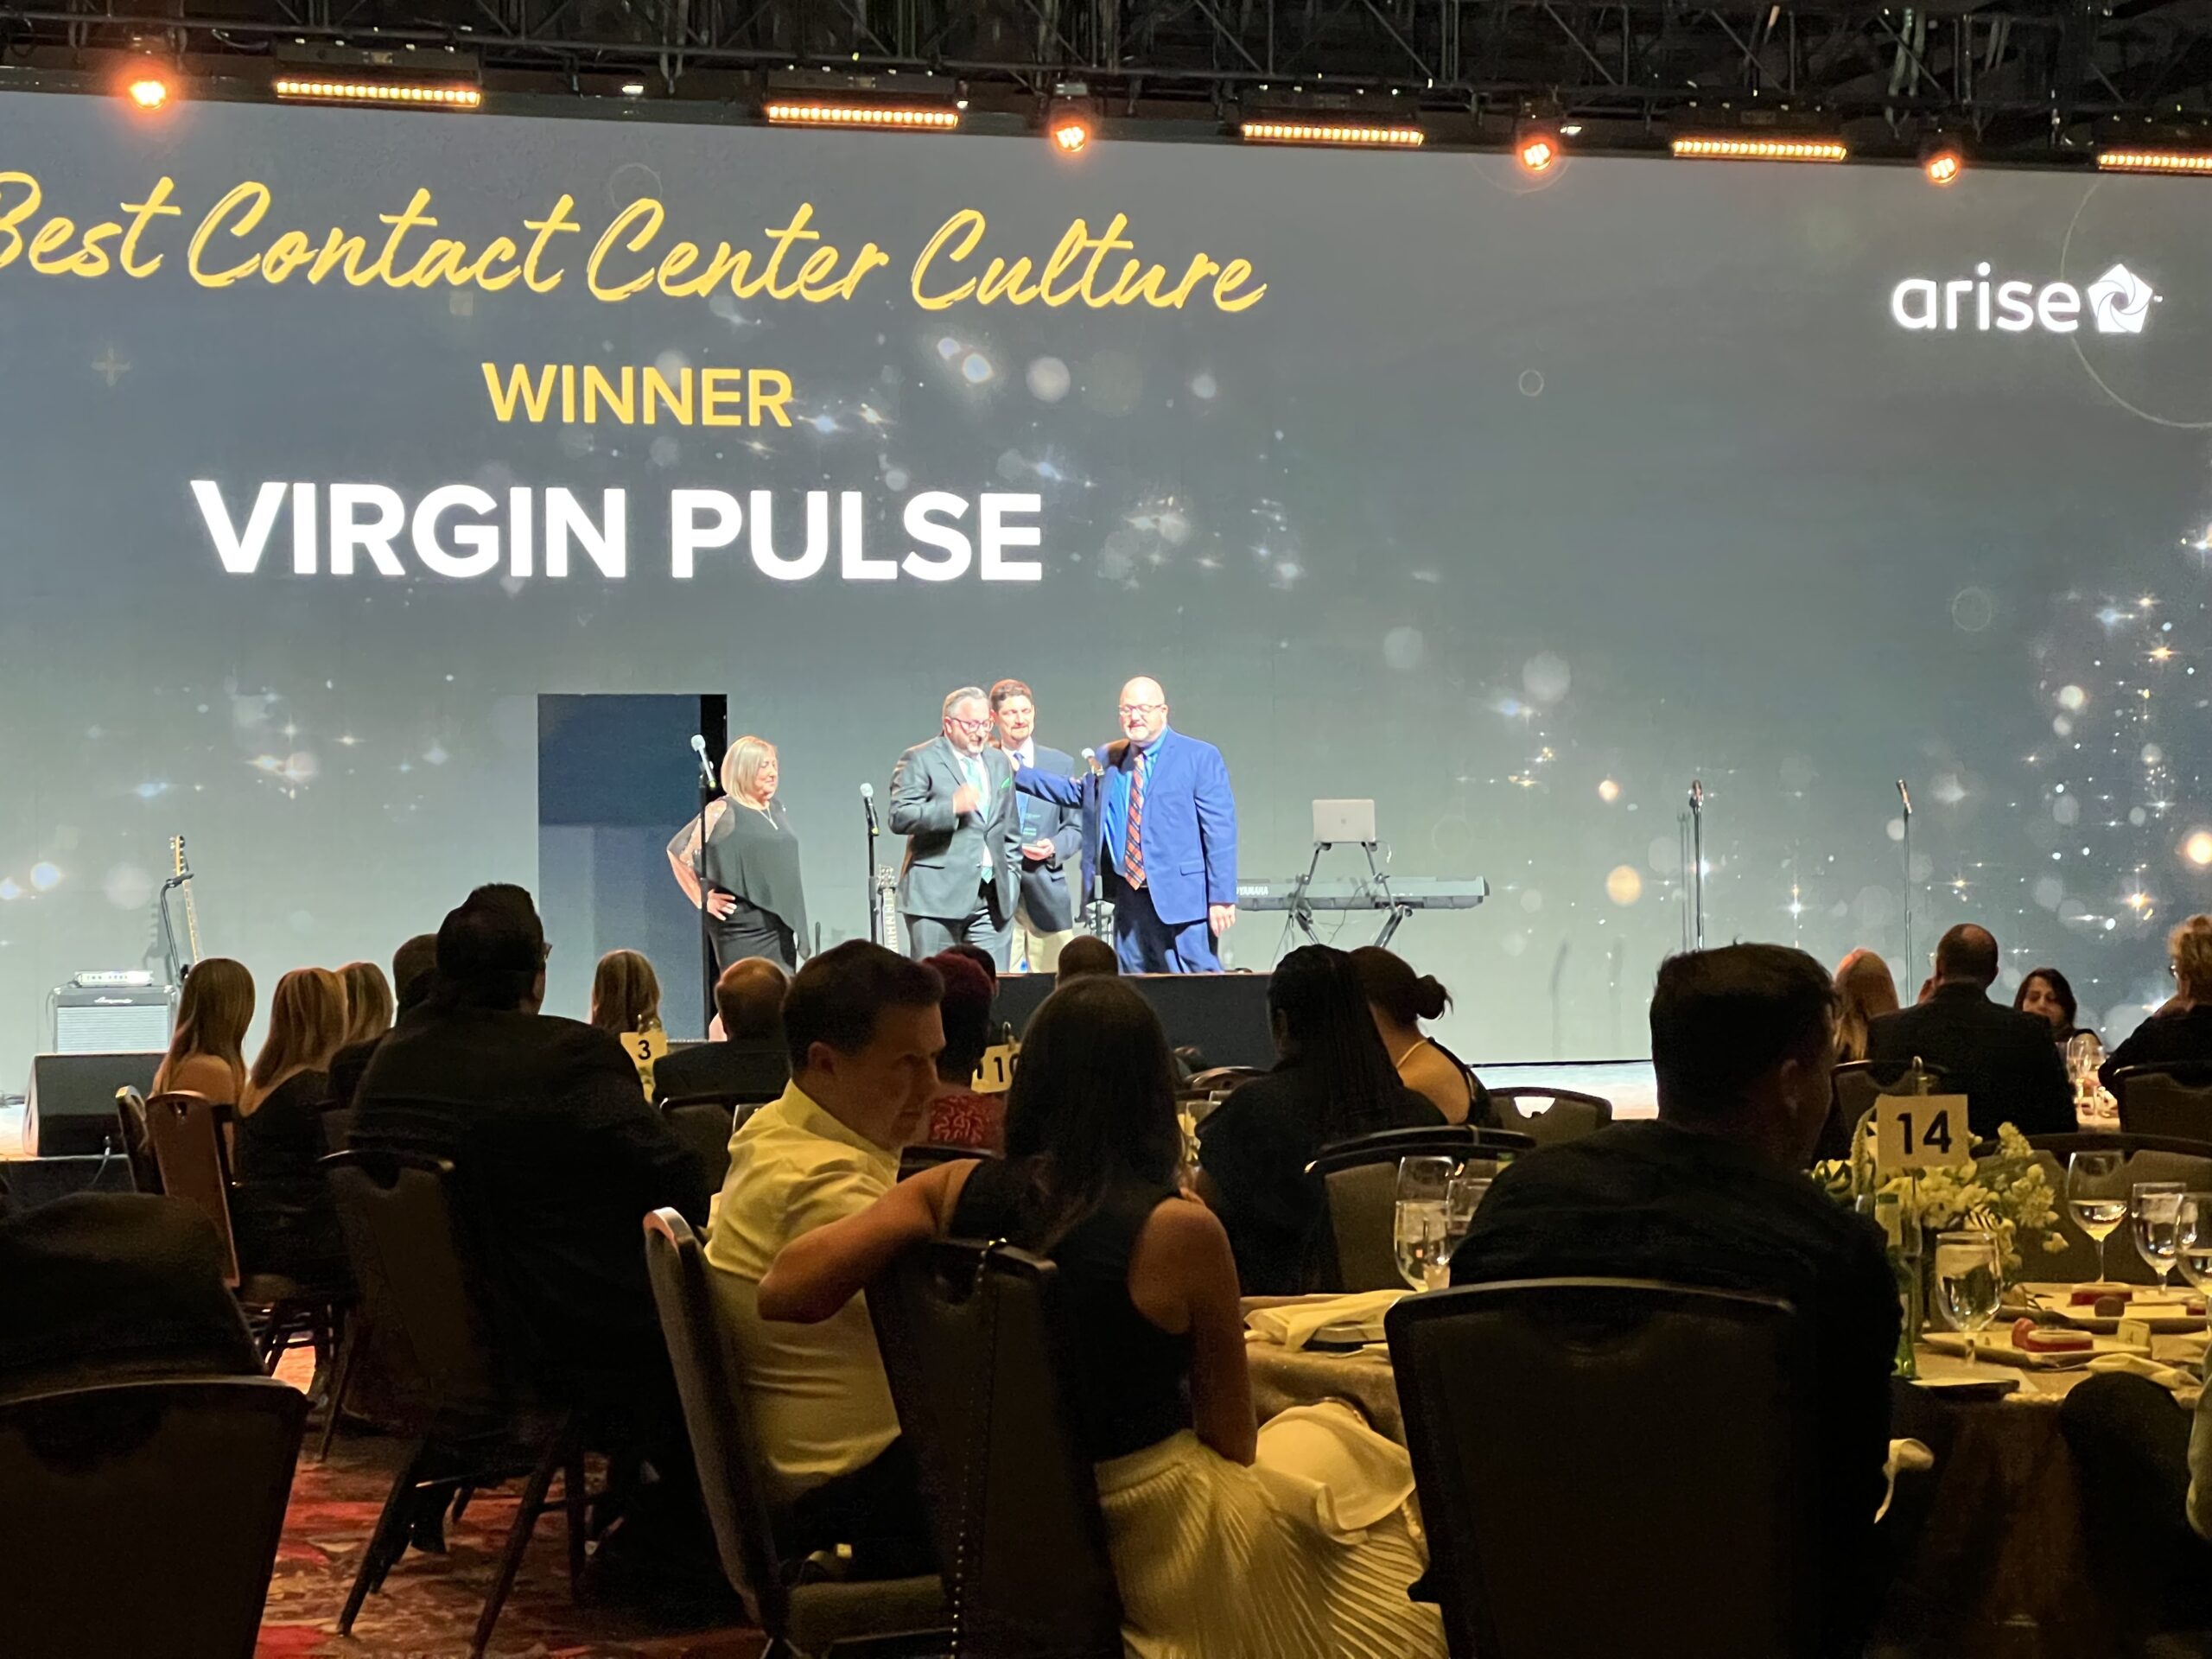 CCW Excellence Awards stage presenting award for Best Contact Center Culture to Virgin Pulse